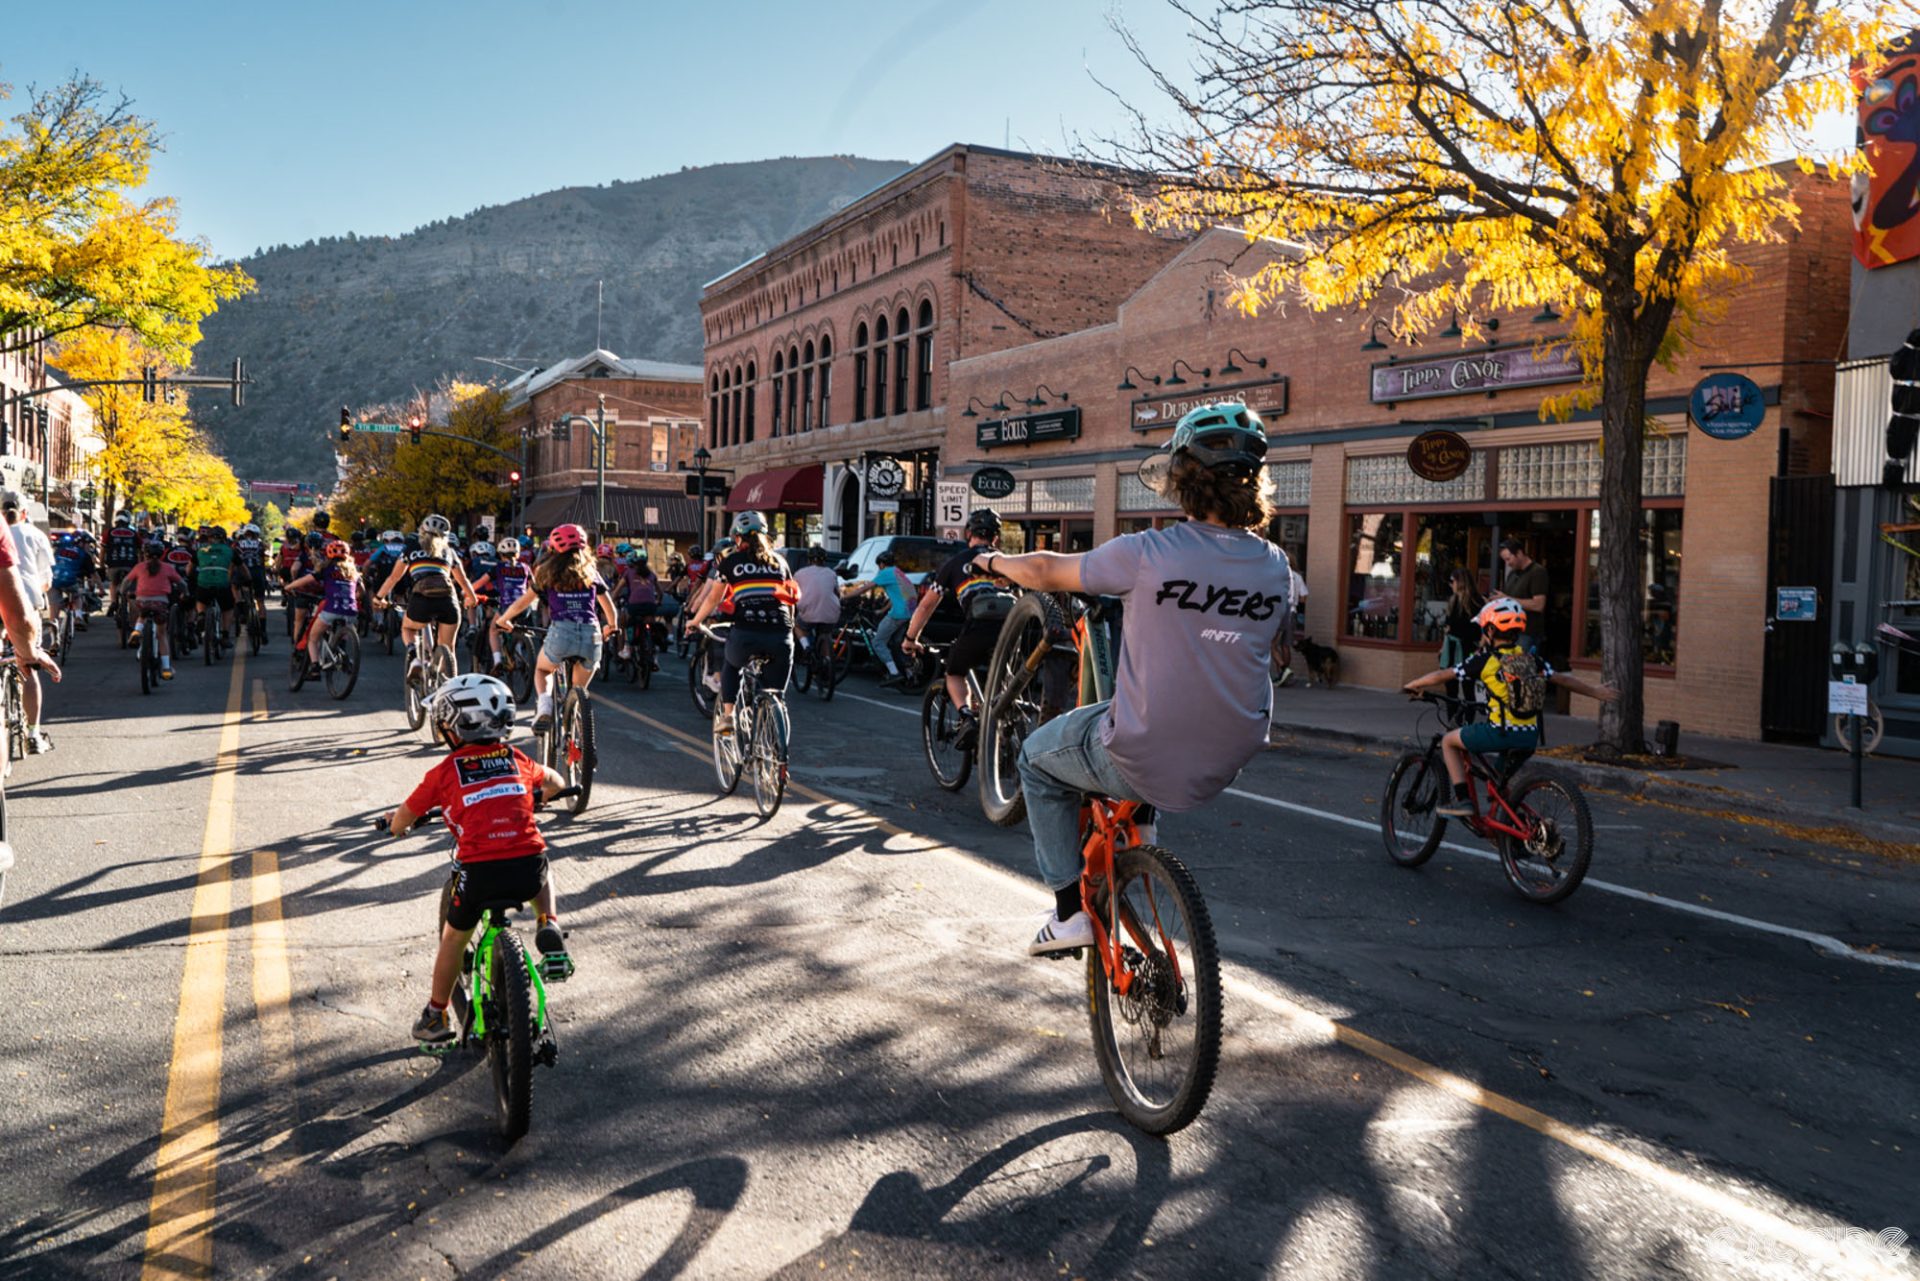 The celebratory ride rolls down a street in Durango. It's gorgeous afternoon sun, yellow leaves on trees, and green forested hills in the background. A rider at the back in a Flyers t-shirt pops a wheelie on his mountain bike as the group rides through town.